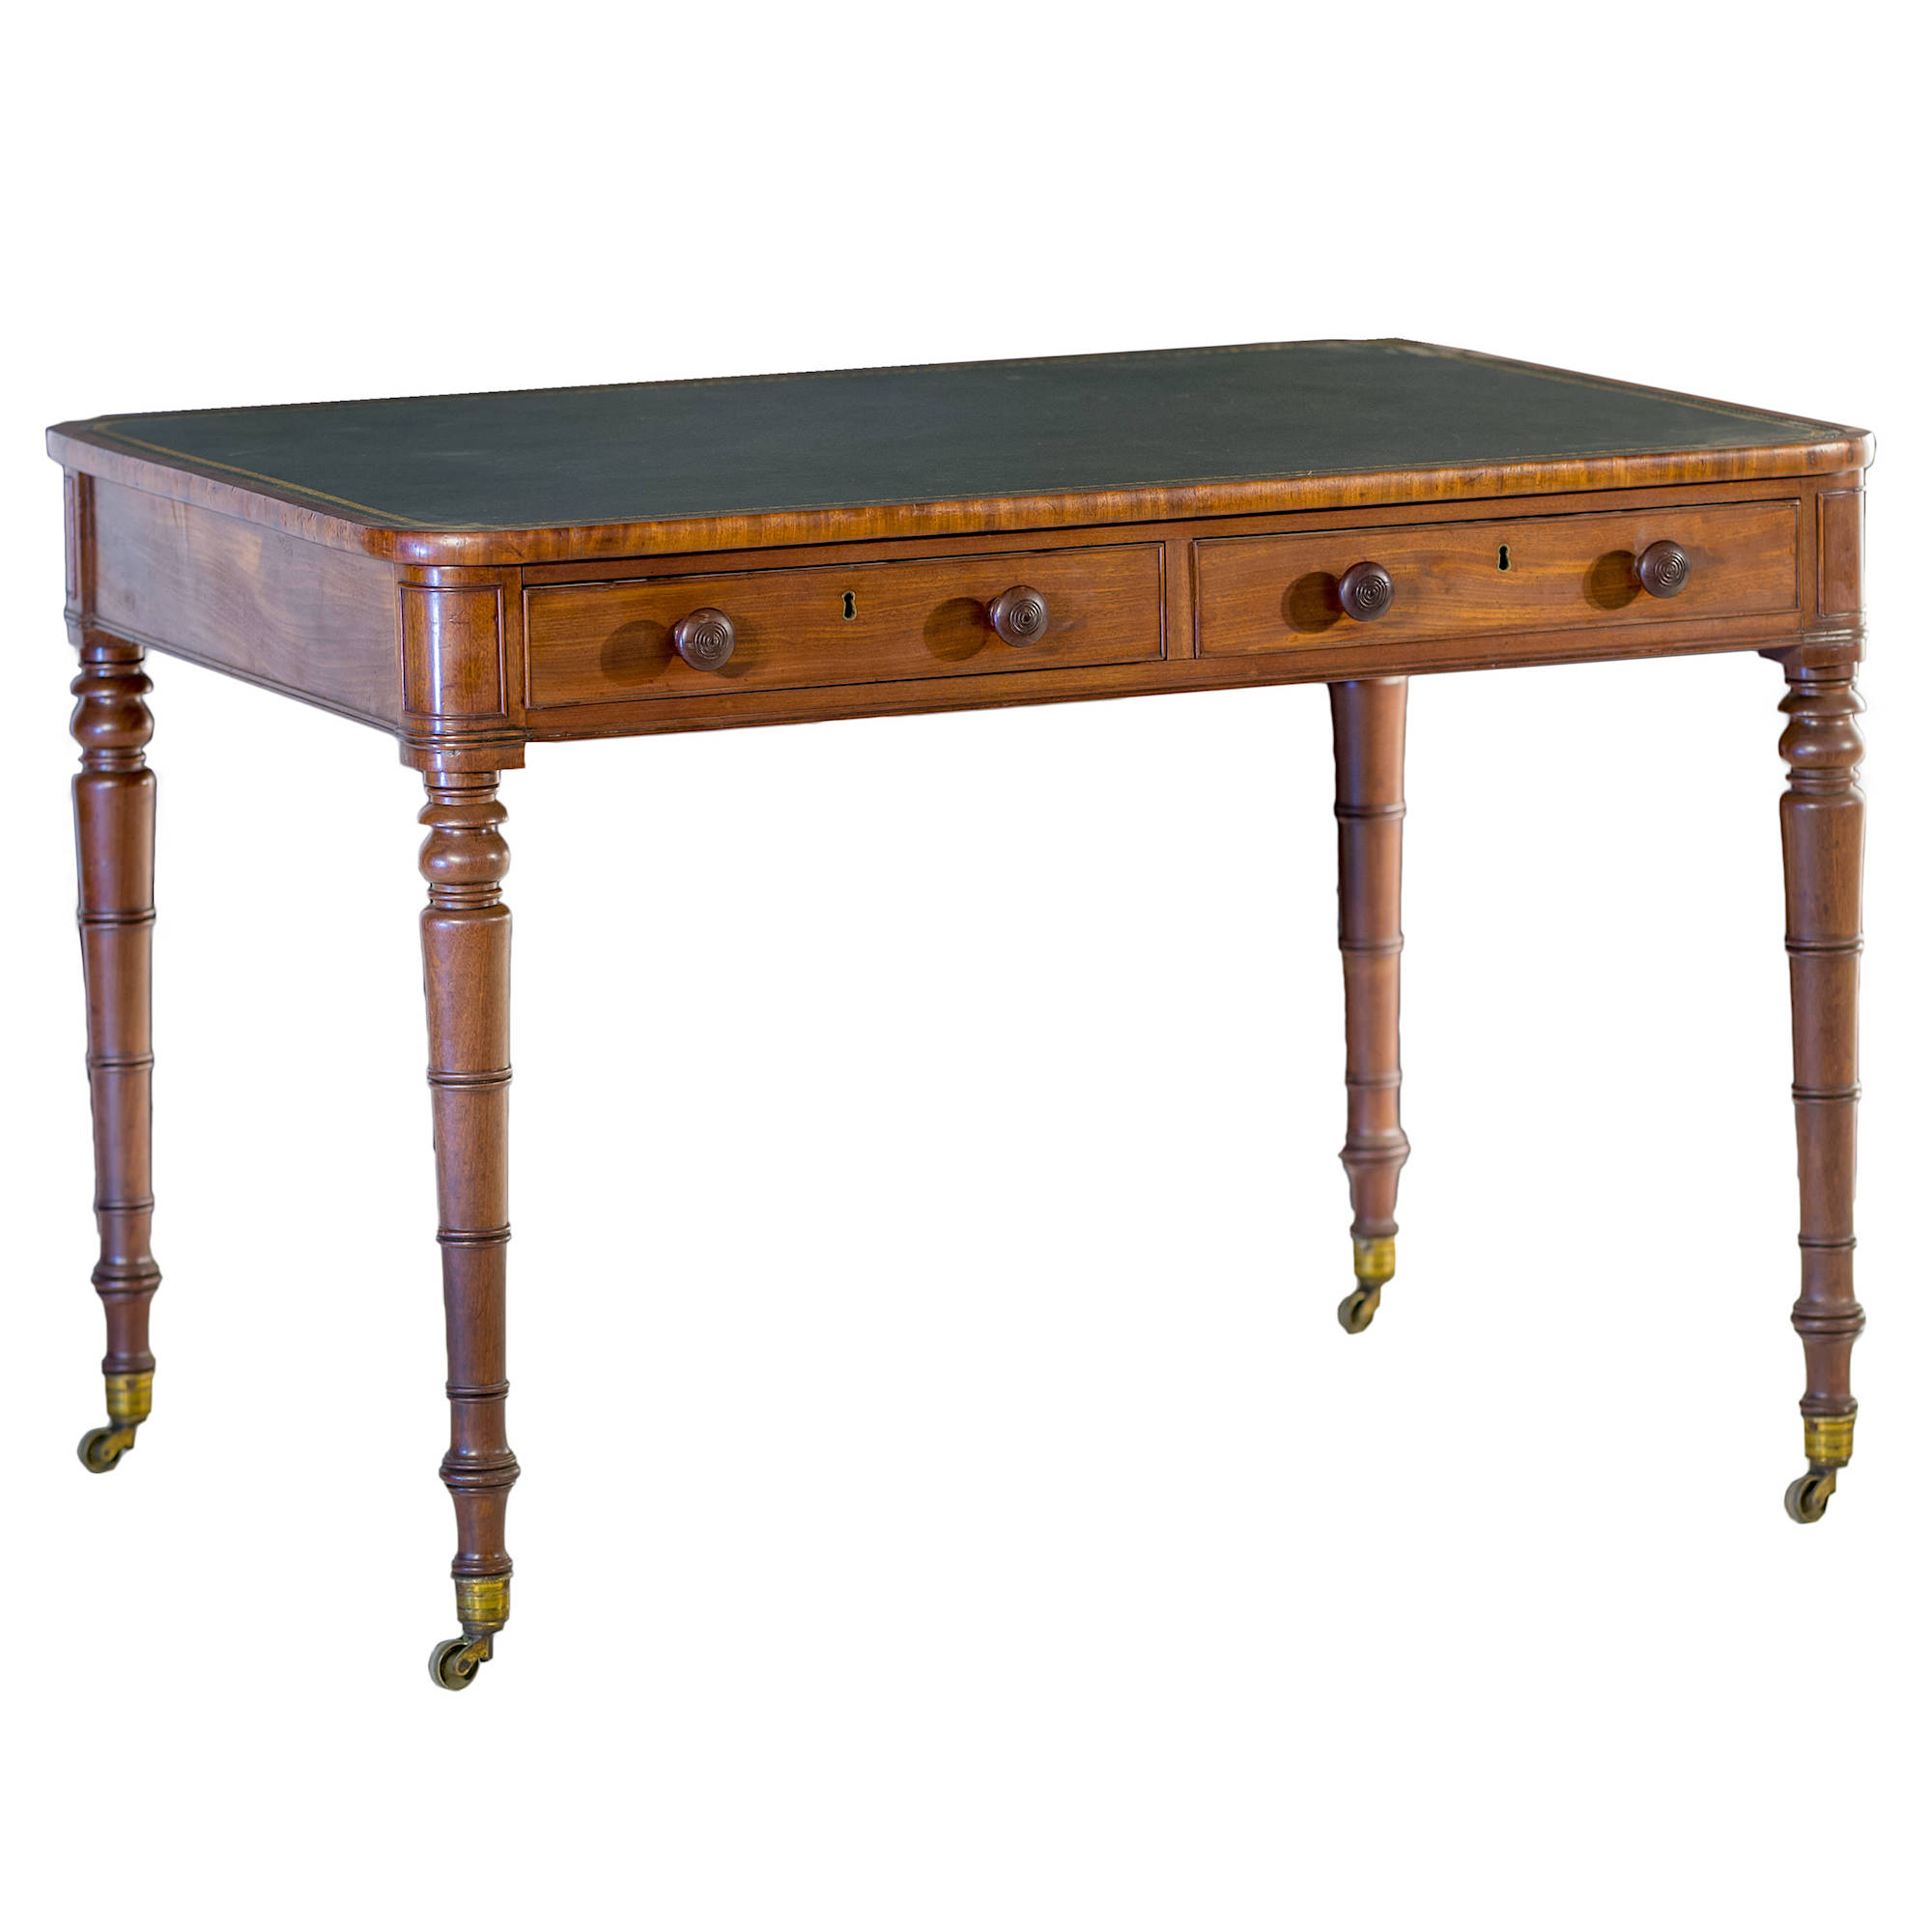 'George IV Mahogany Writing Table with Gilt Tooled Leather Inlay Circa 1830'